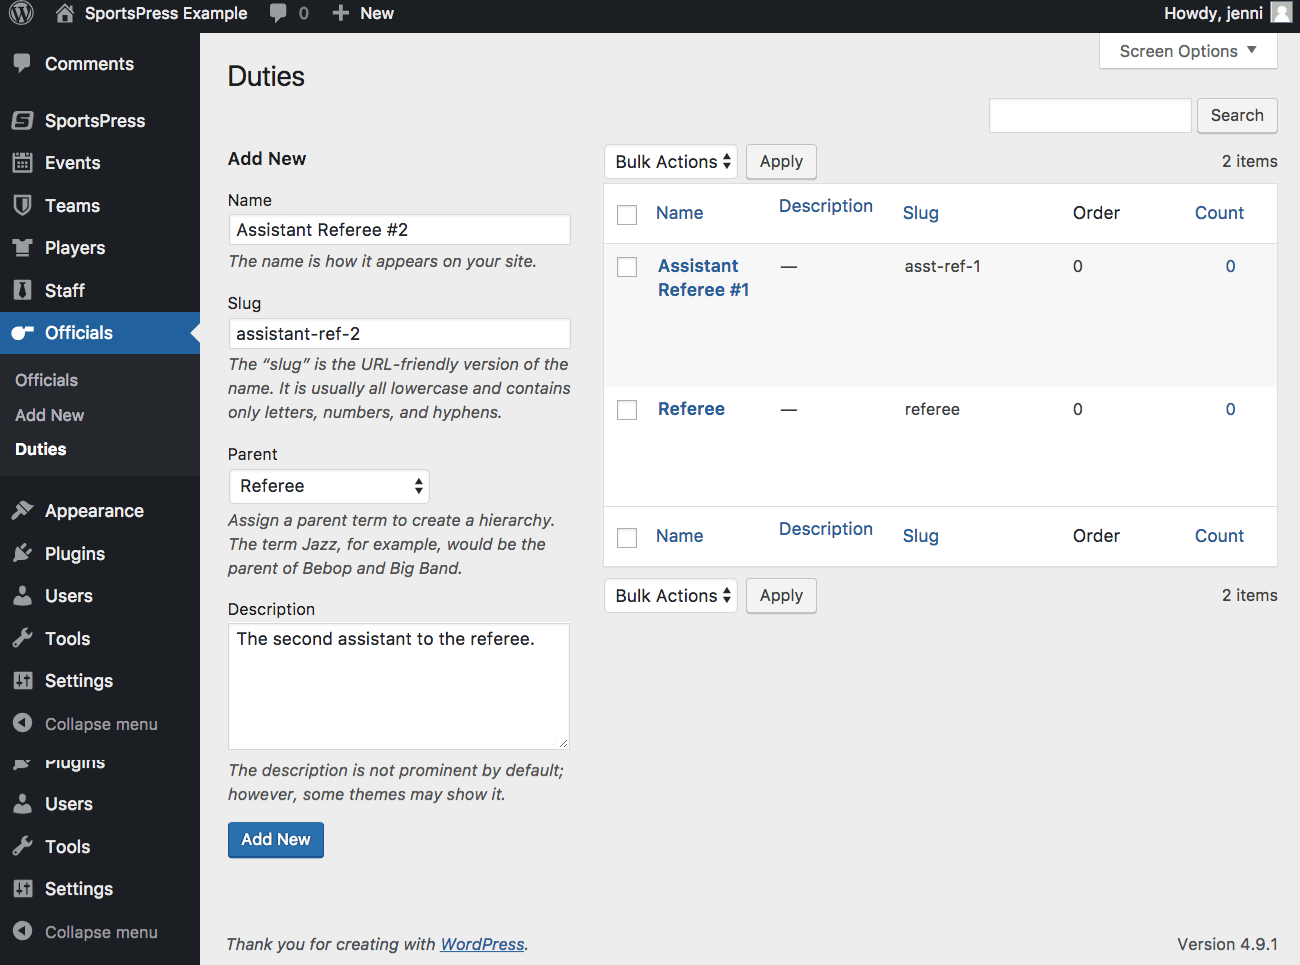 Duties page